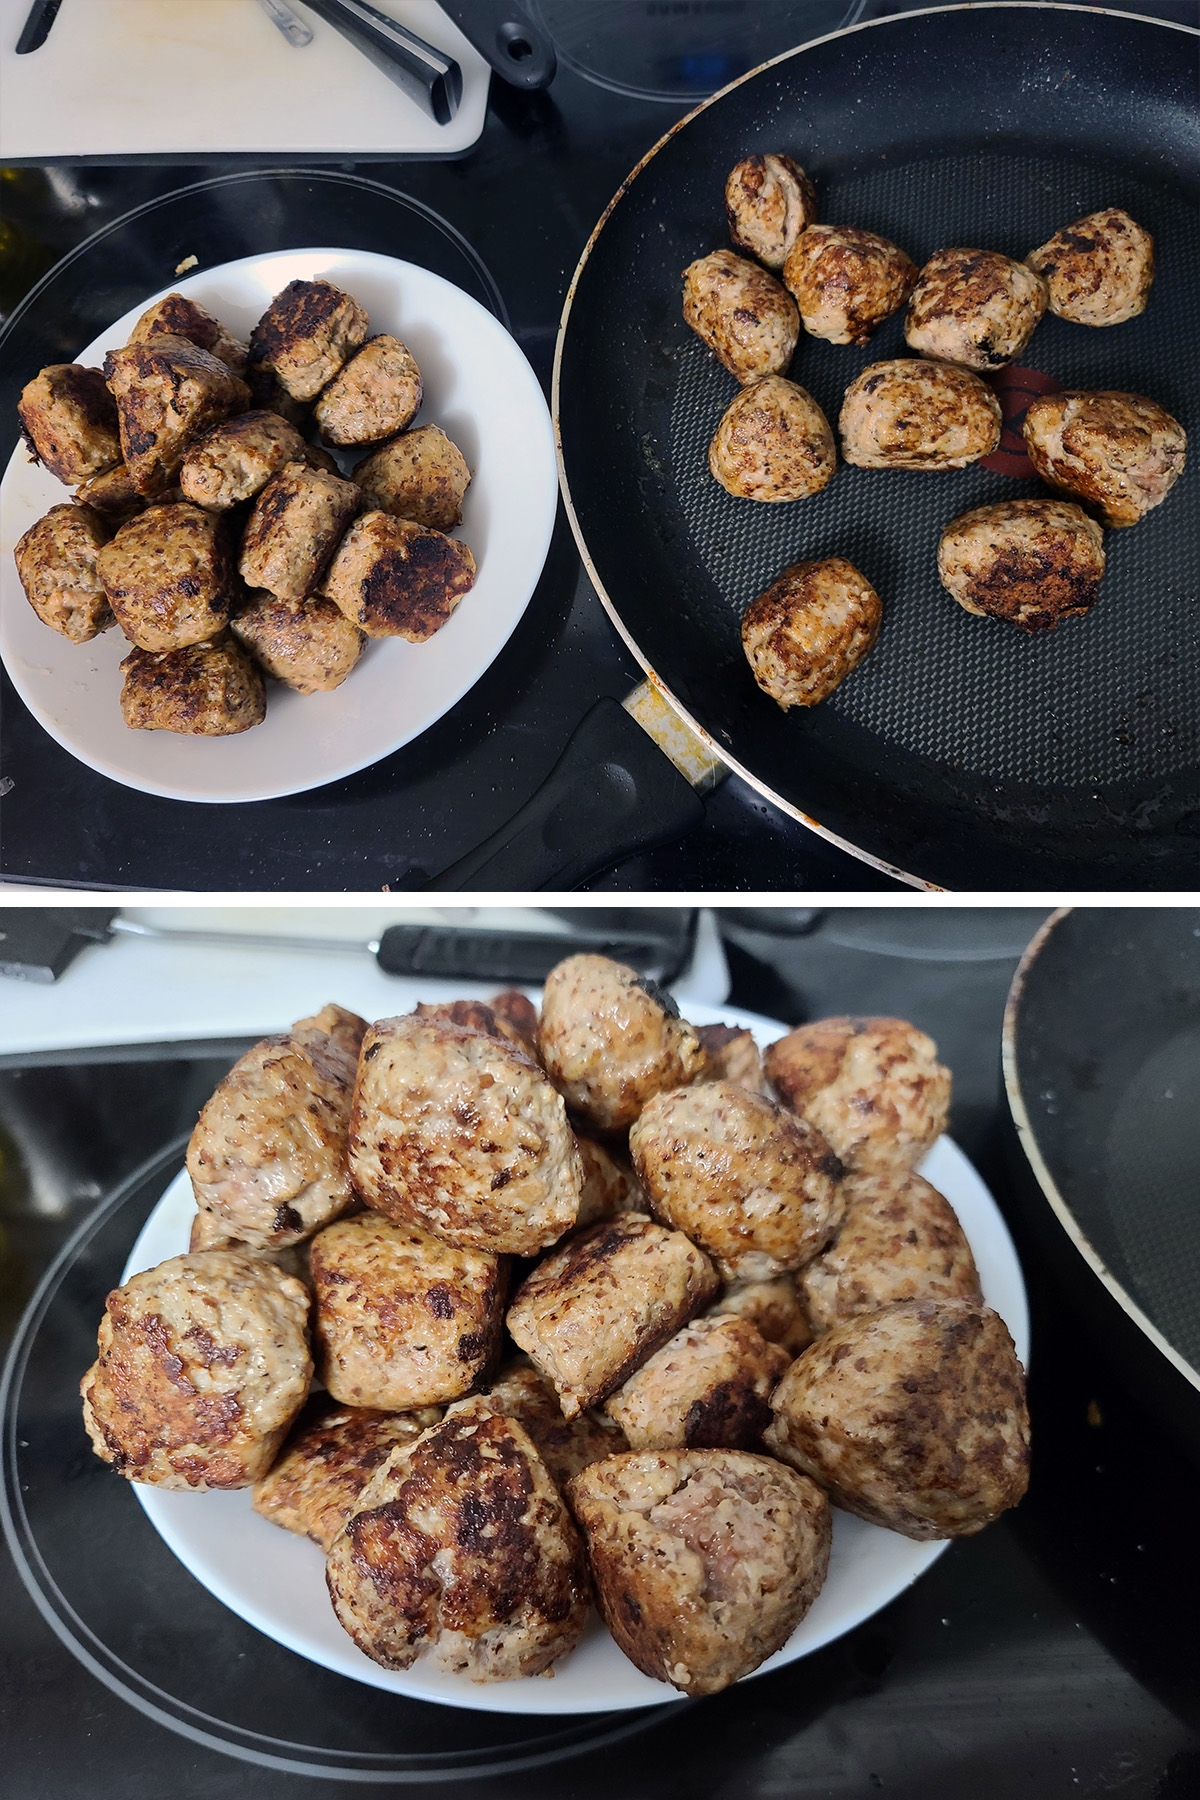 A two part image showing the meatballs being cooked, then placed in a bowl.